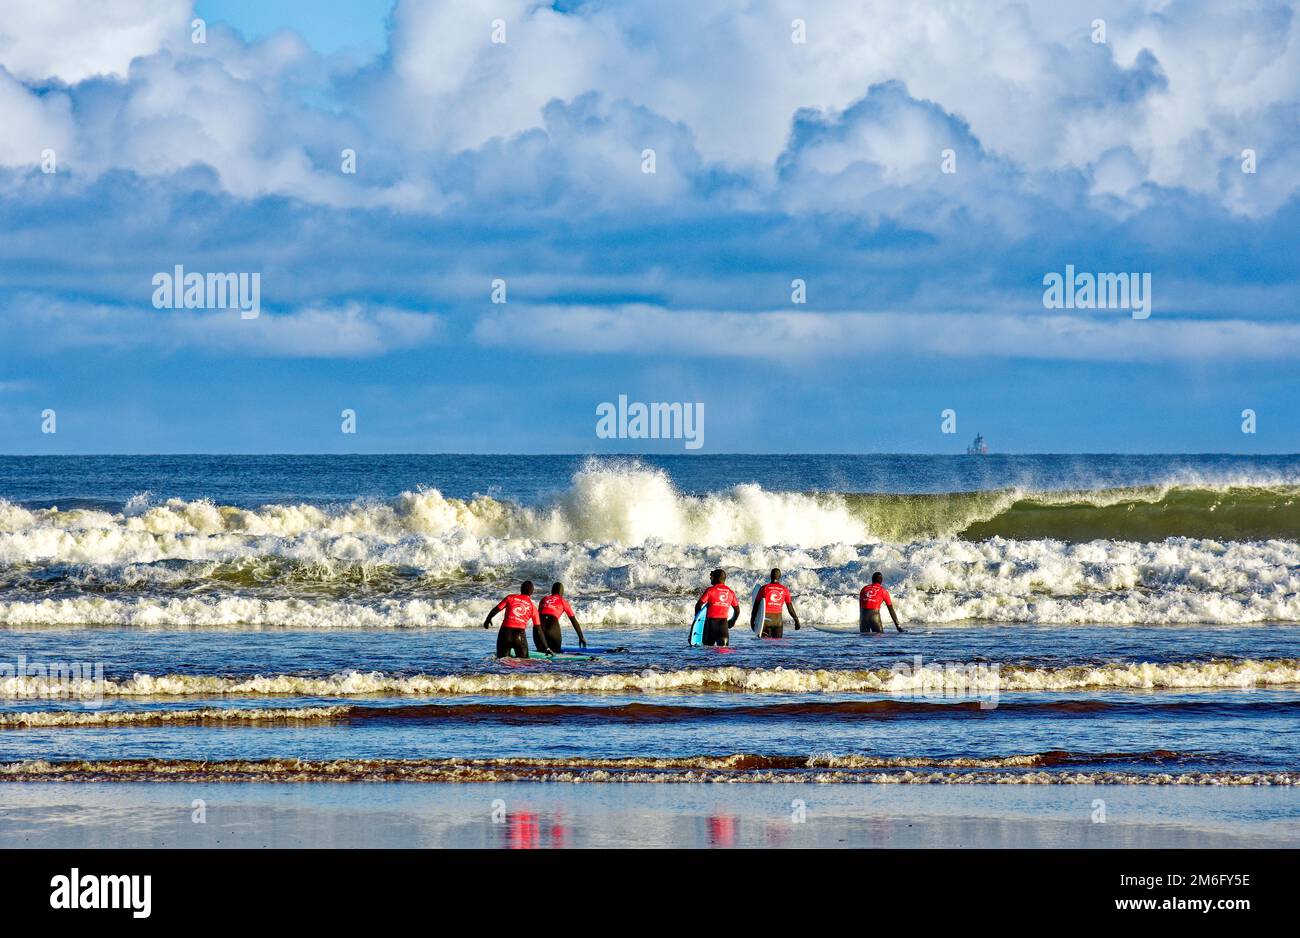 Lossiemouth East Beach Moray coast Scotland five surfers in red from the New Wave Surf School heading into the sea and breaking waves Stock Photo